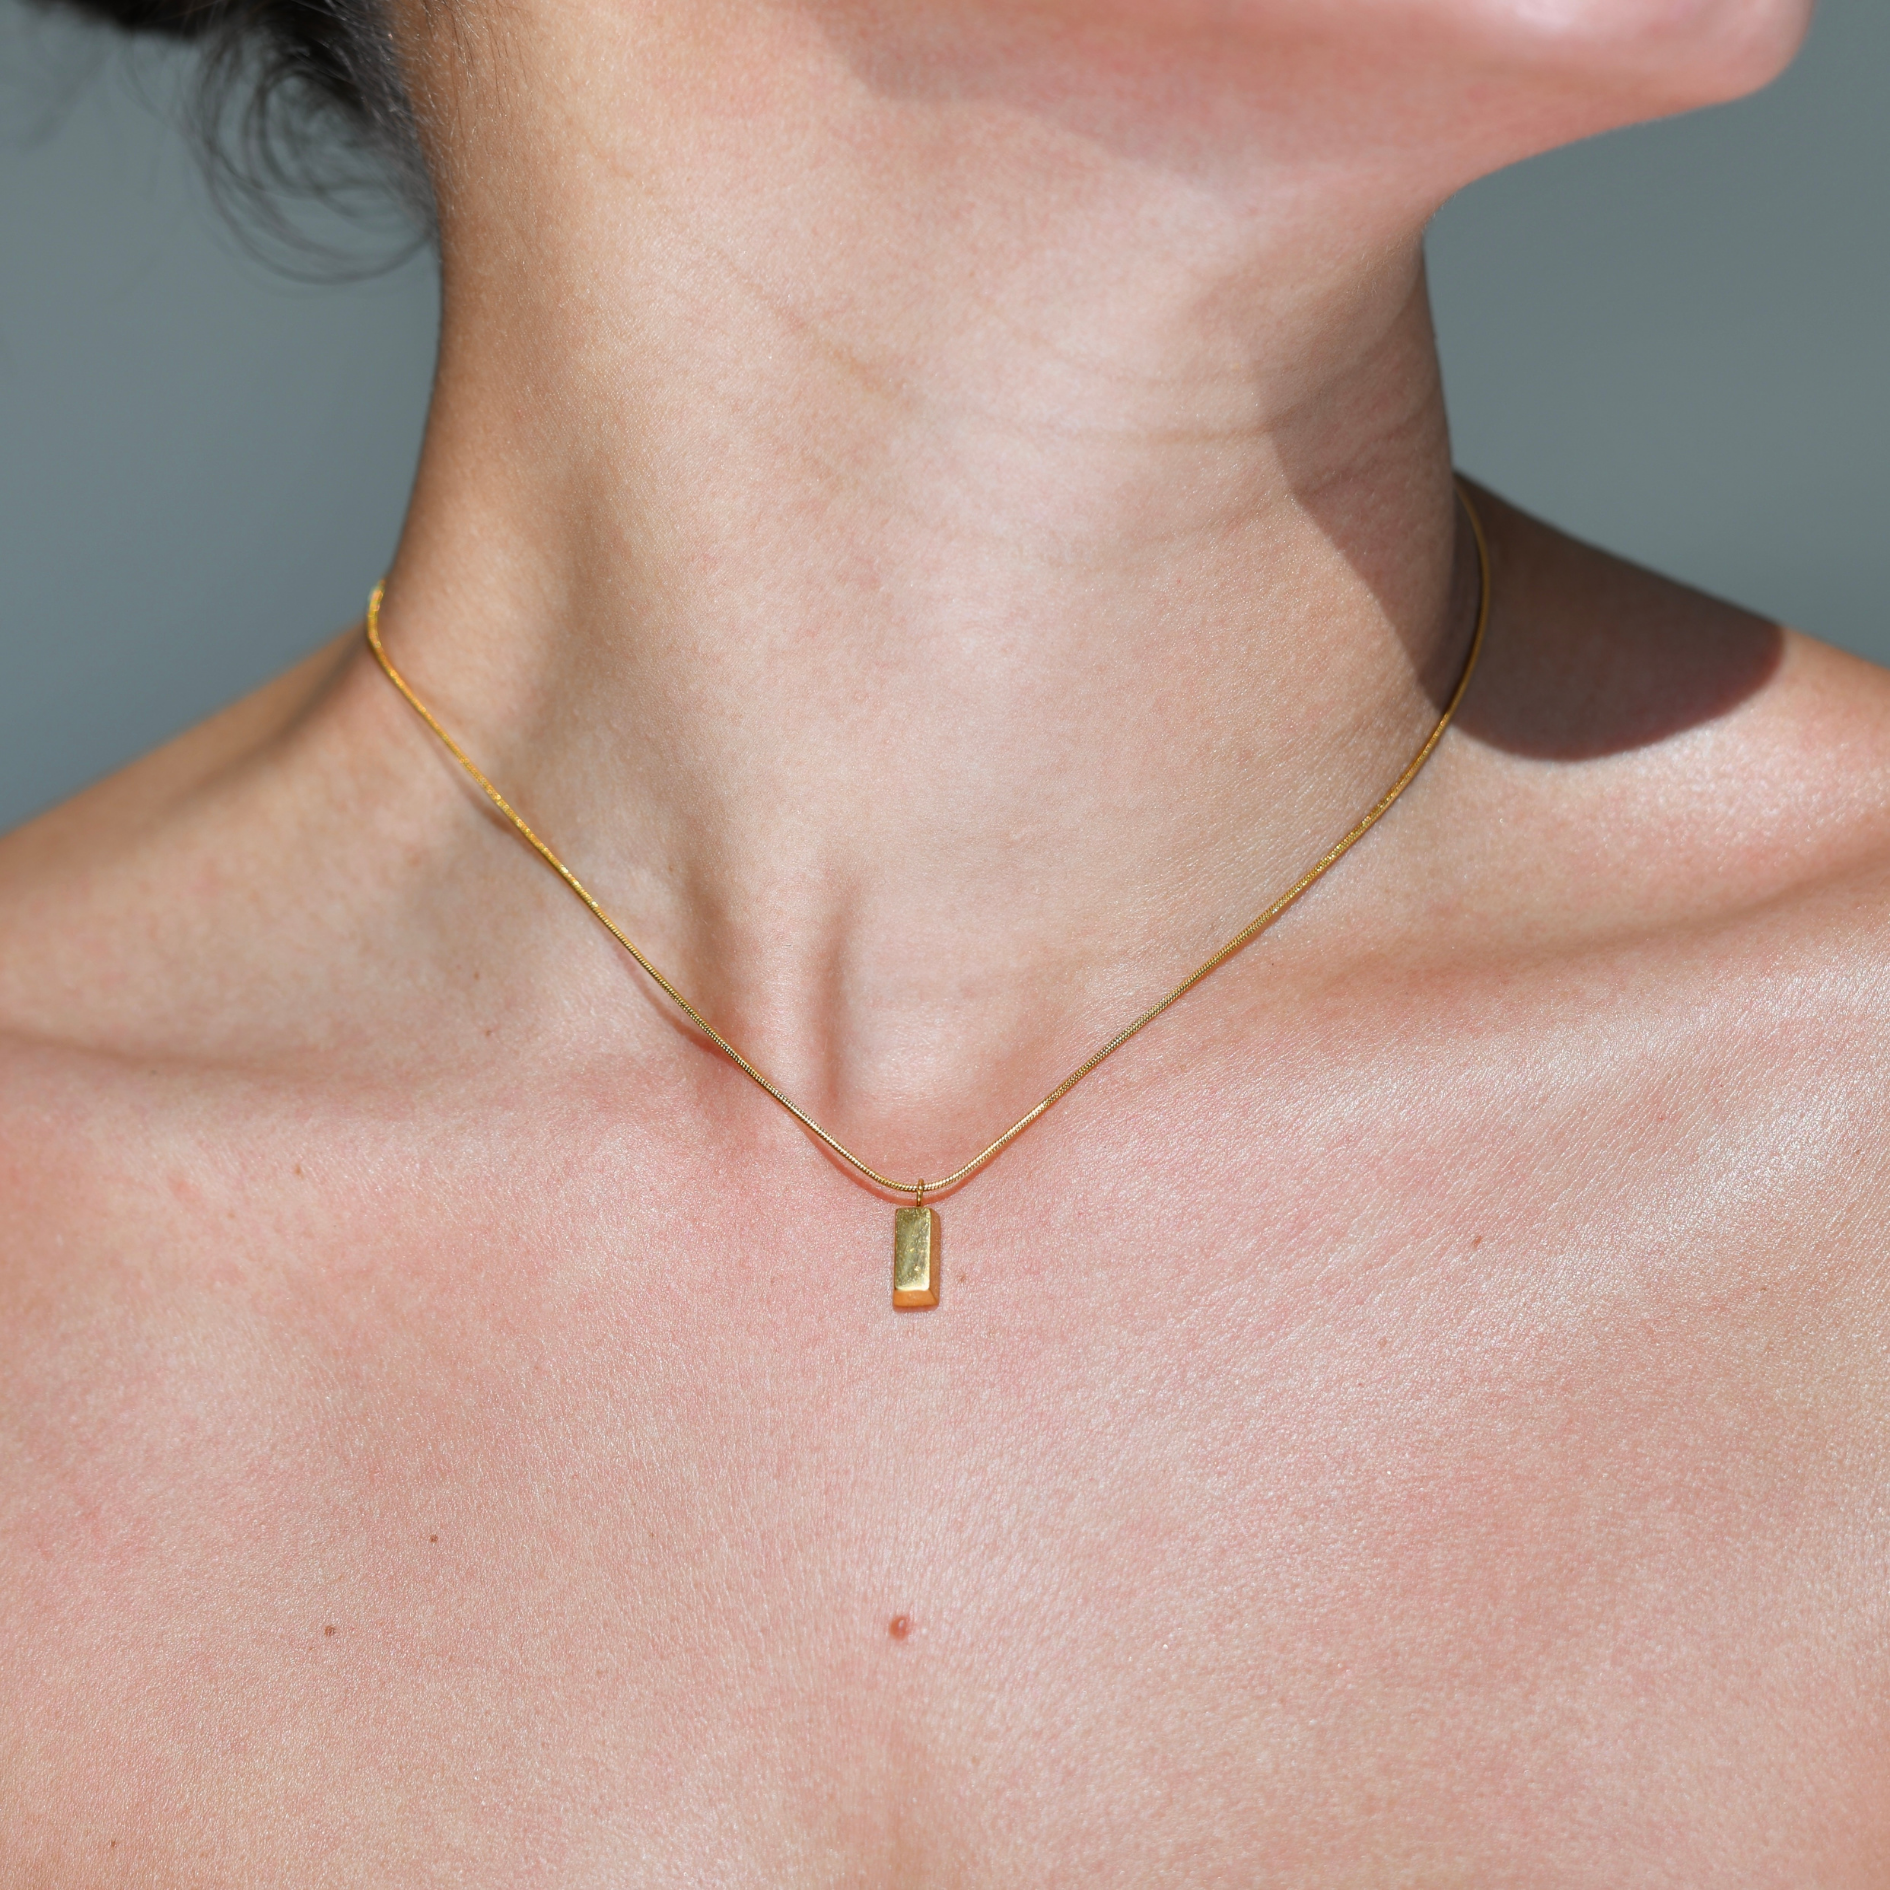 Gold plated chain necklace. A gold bar drop in the necklace. Gold bar pendant necklace.